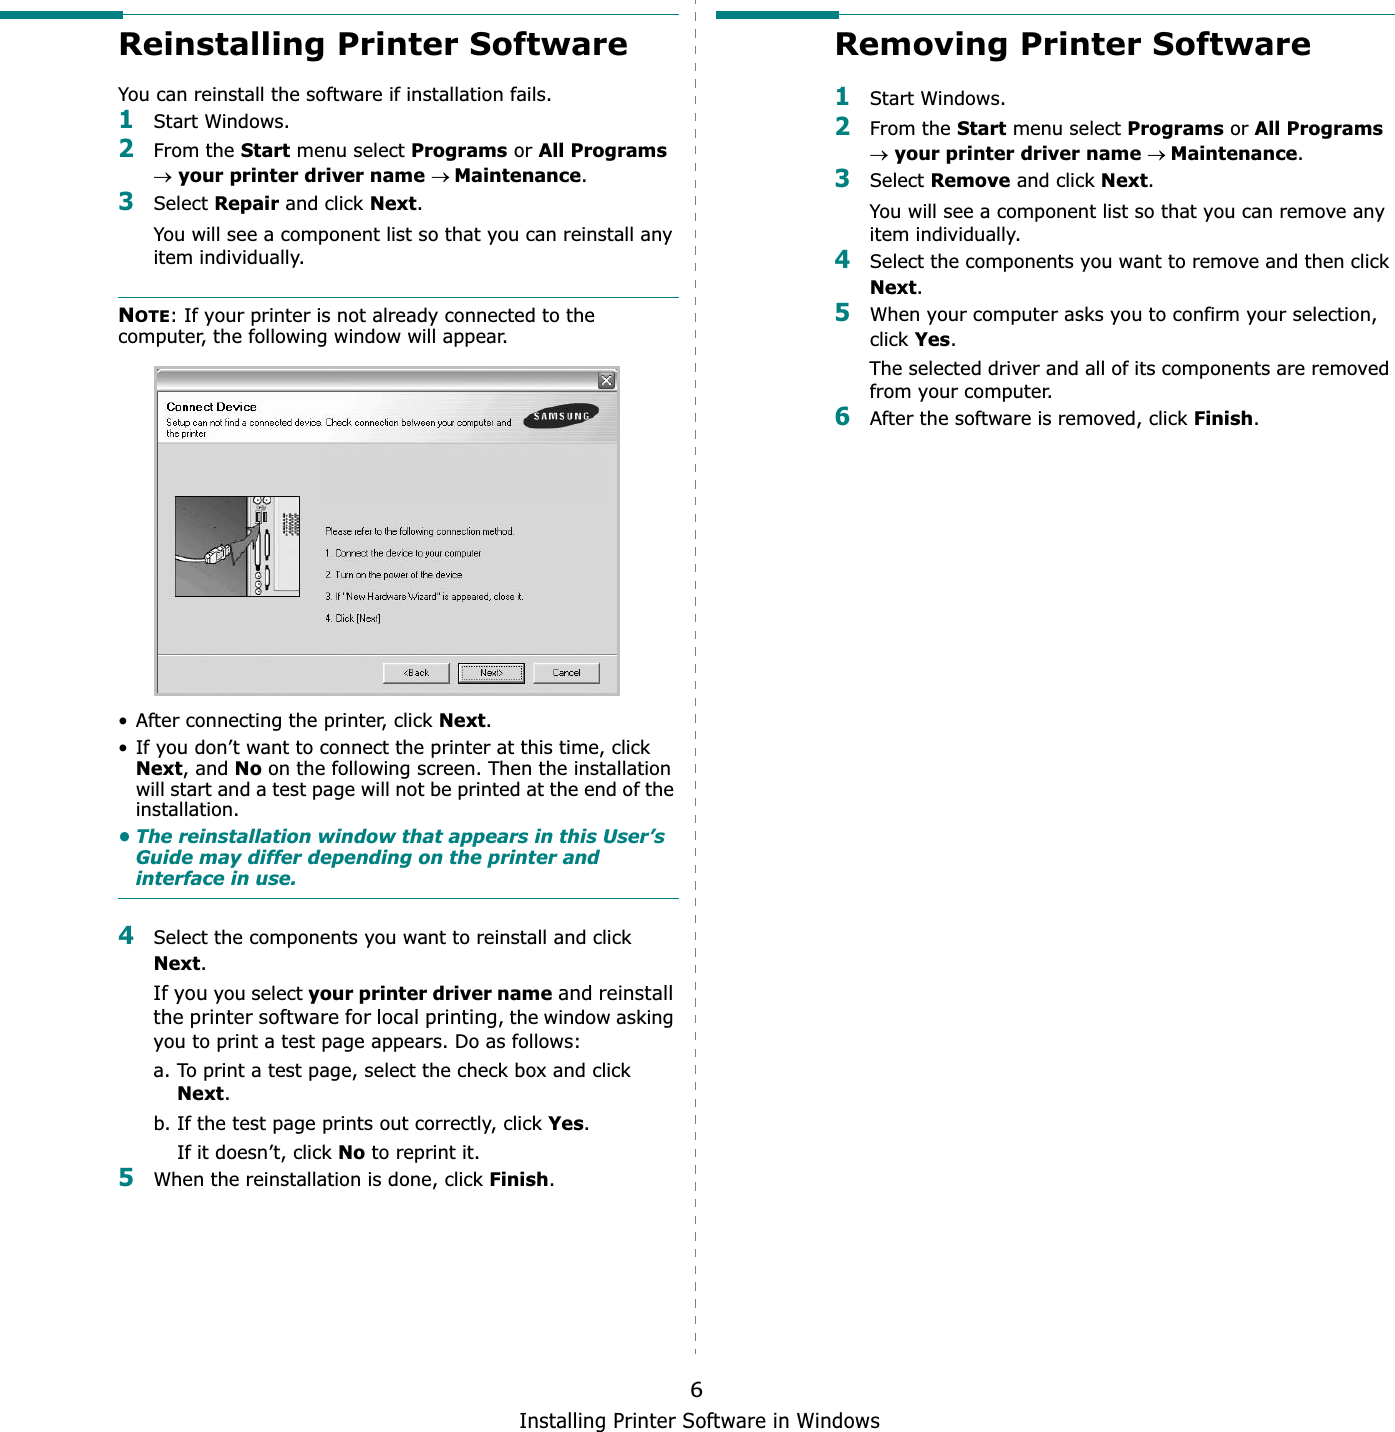 Installing Printer Software in Windows6Reinstalling Printer SoftwareYou can reinstall the software if installation fails.1Start Windows.2From the Start menu select Programs or All Programsoyour printer driver name oMaintenance.3Select Repair and click Next.You will see a component list so that you can reinstall any item individually.NOTE: If your printer is not already connected to the computer, the following window will appear.• After connecting the printer, click Next.• If you don’t want to connect the printer at this time, click Next, and No on the following screen. Then the installation will start and a test page will not be printed at the end of the installation.• The reinstallation window that appears in this User’s Guide may differ depending on the printer and interface in use.4Select the components you want to reinstall and click Next.If you you select your printer driver name and reinstall the printer software for local printing, the window asking you to print a test page appears. Do as follows:a. To print a test page, select the check box and click Next.b. If the test page prints out correctly, click Yes.If it doesn’t, click No to reprint it.5When the reinstallation is done, click Finish.Removing Printer Software1Start Windows.2From the Start menu select Programs or All Programsoyour printer driver name oMaintenance.3Select Remove and click Next.You will see a component list so that you can remove any item individually.4Select the components you want to remove and then click Next.5When your computer asks you to confirm your selection, clickYes.The selected driver and all of its components are removed from your computer.6After the software is removed, click Finish.